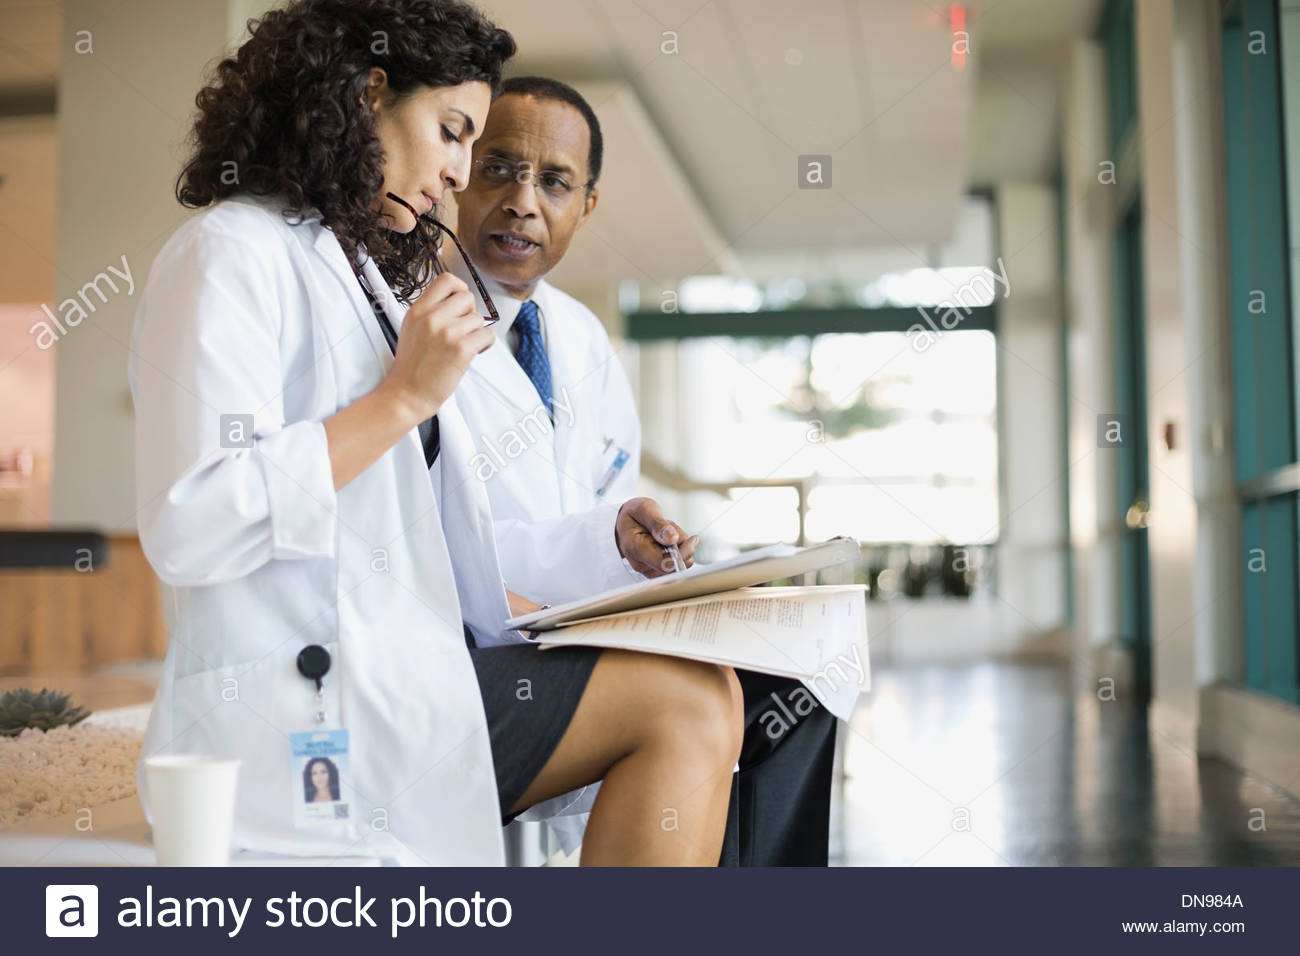 Doctors reviewing medical reports Stock Photo